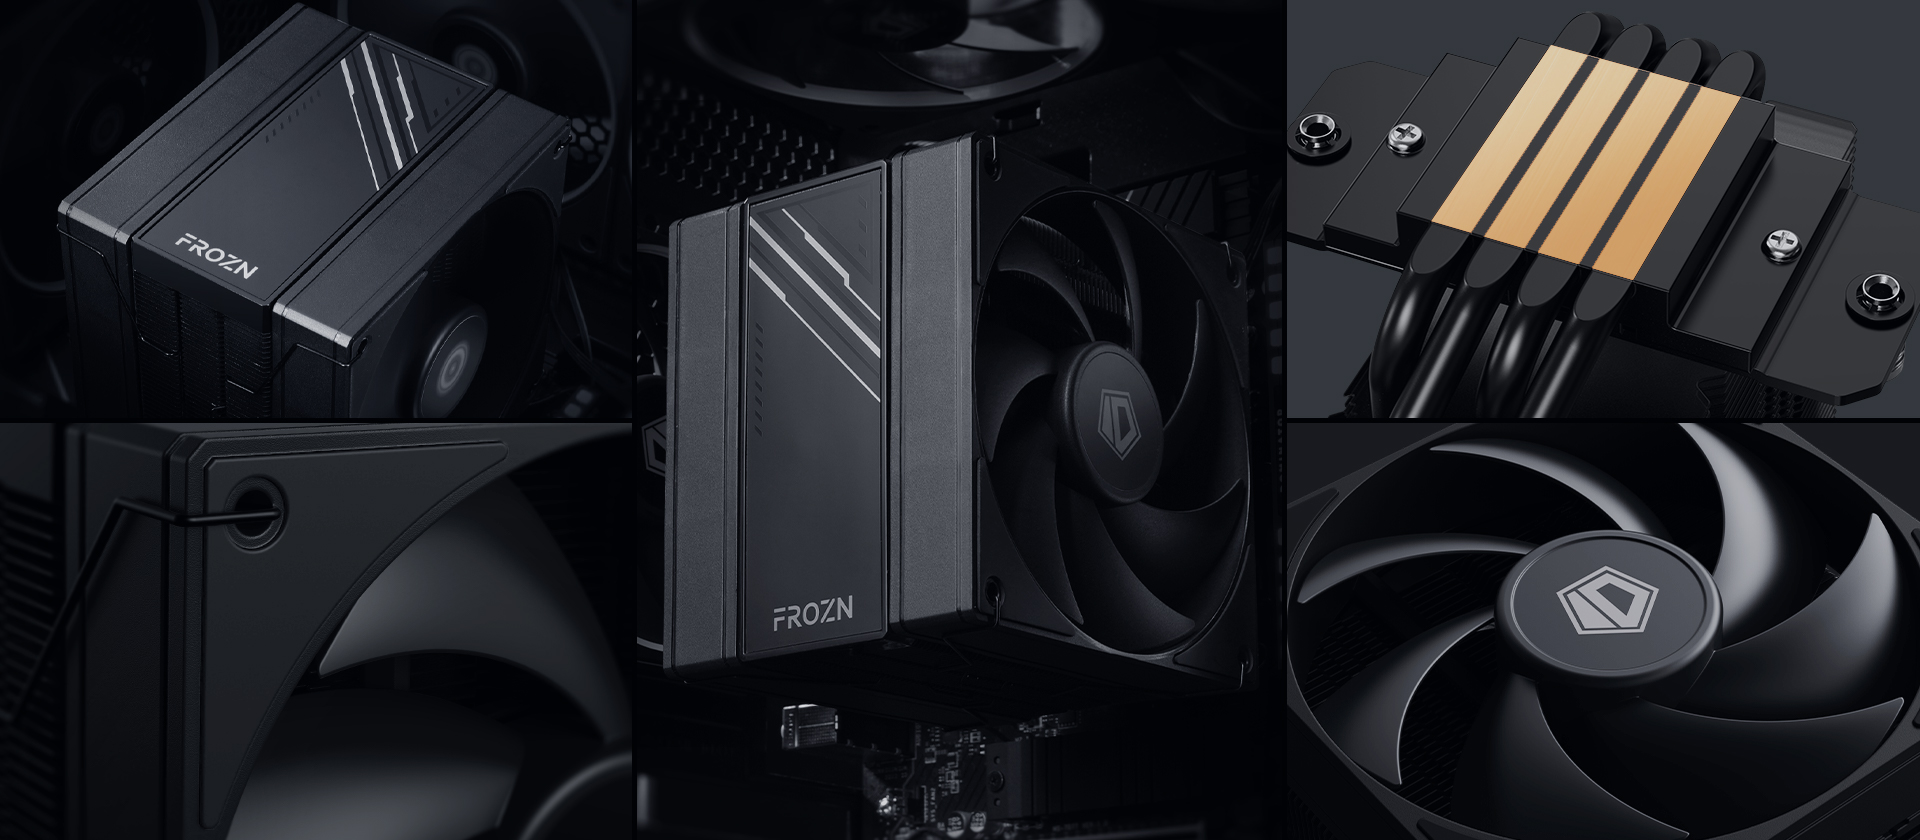 A large marketing image providing additional information about the product ID-COOLING FROZN A410 DK CPU Cooler - Black - Additional alt info not provided